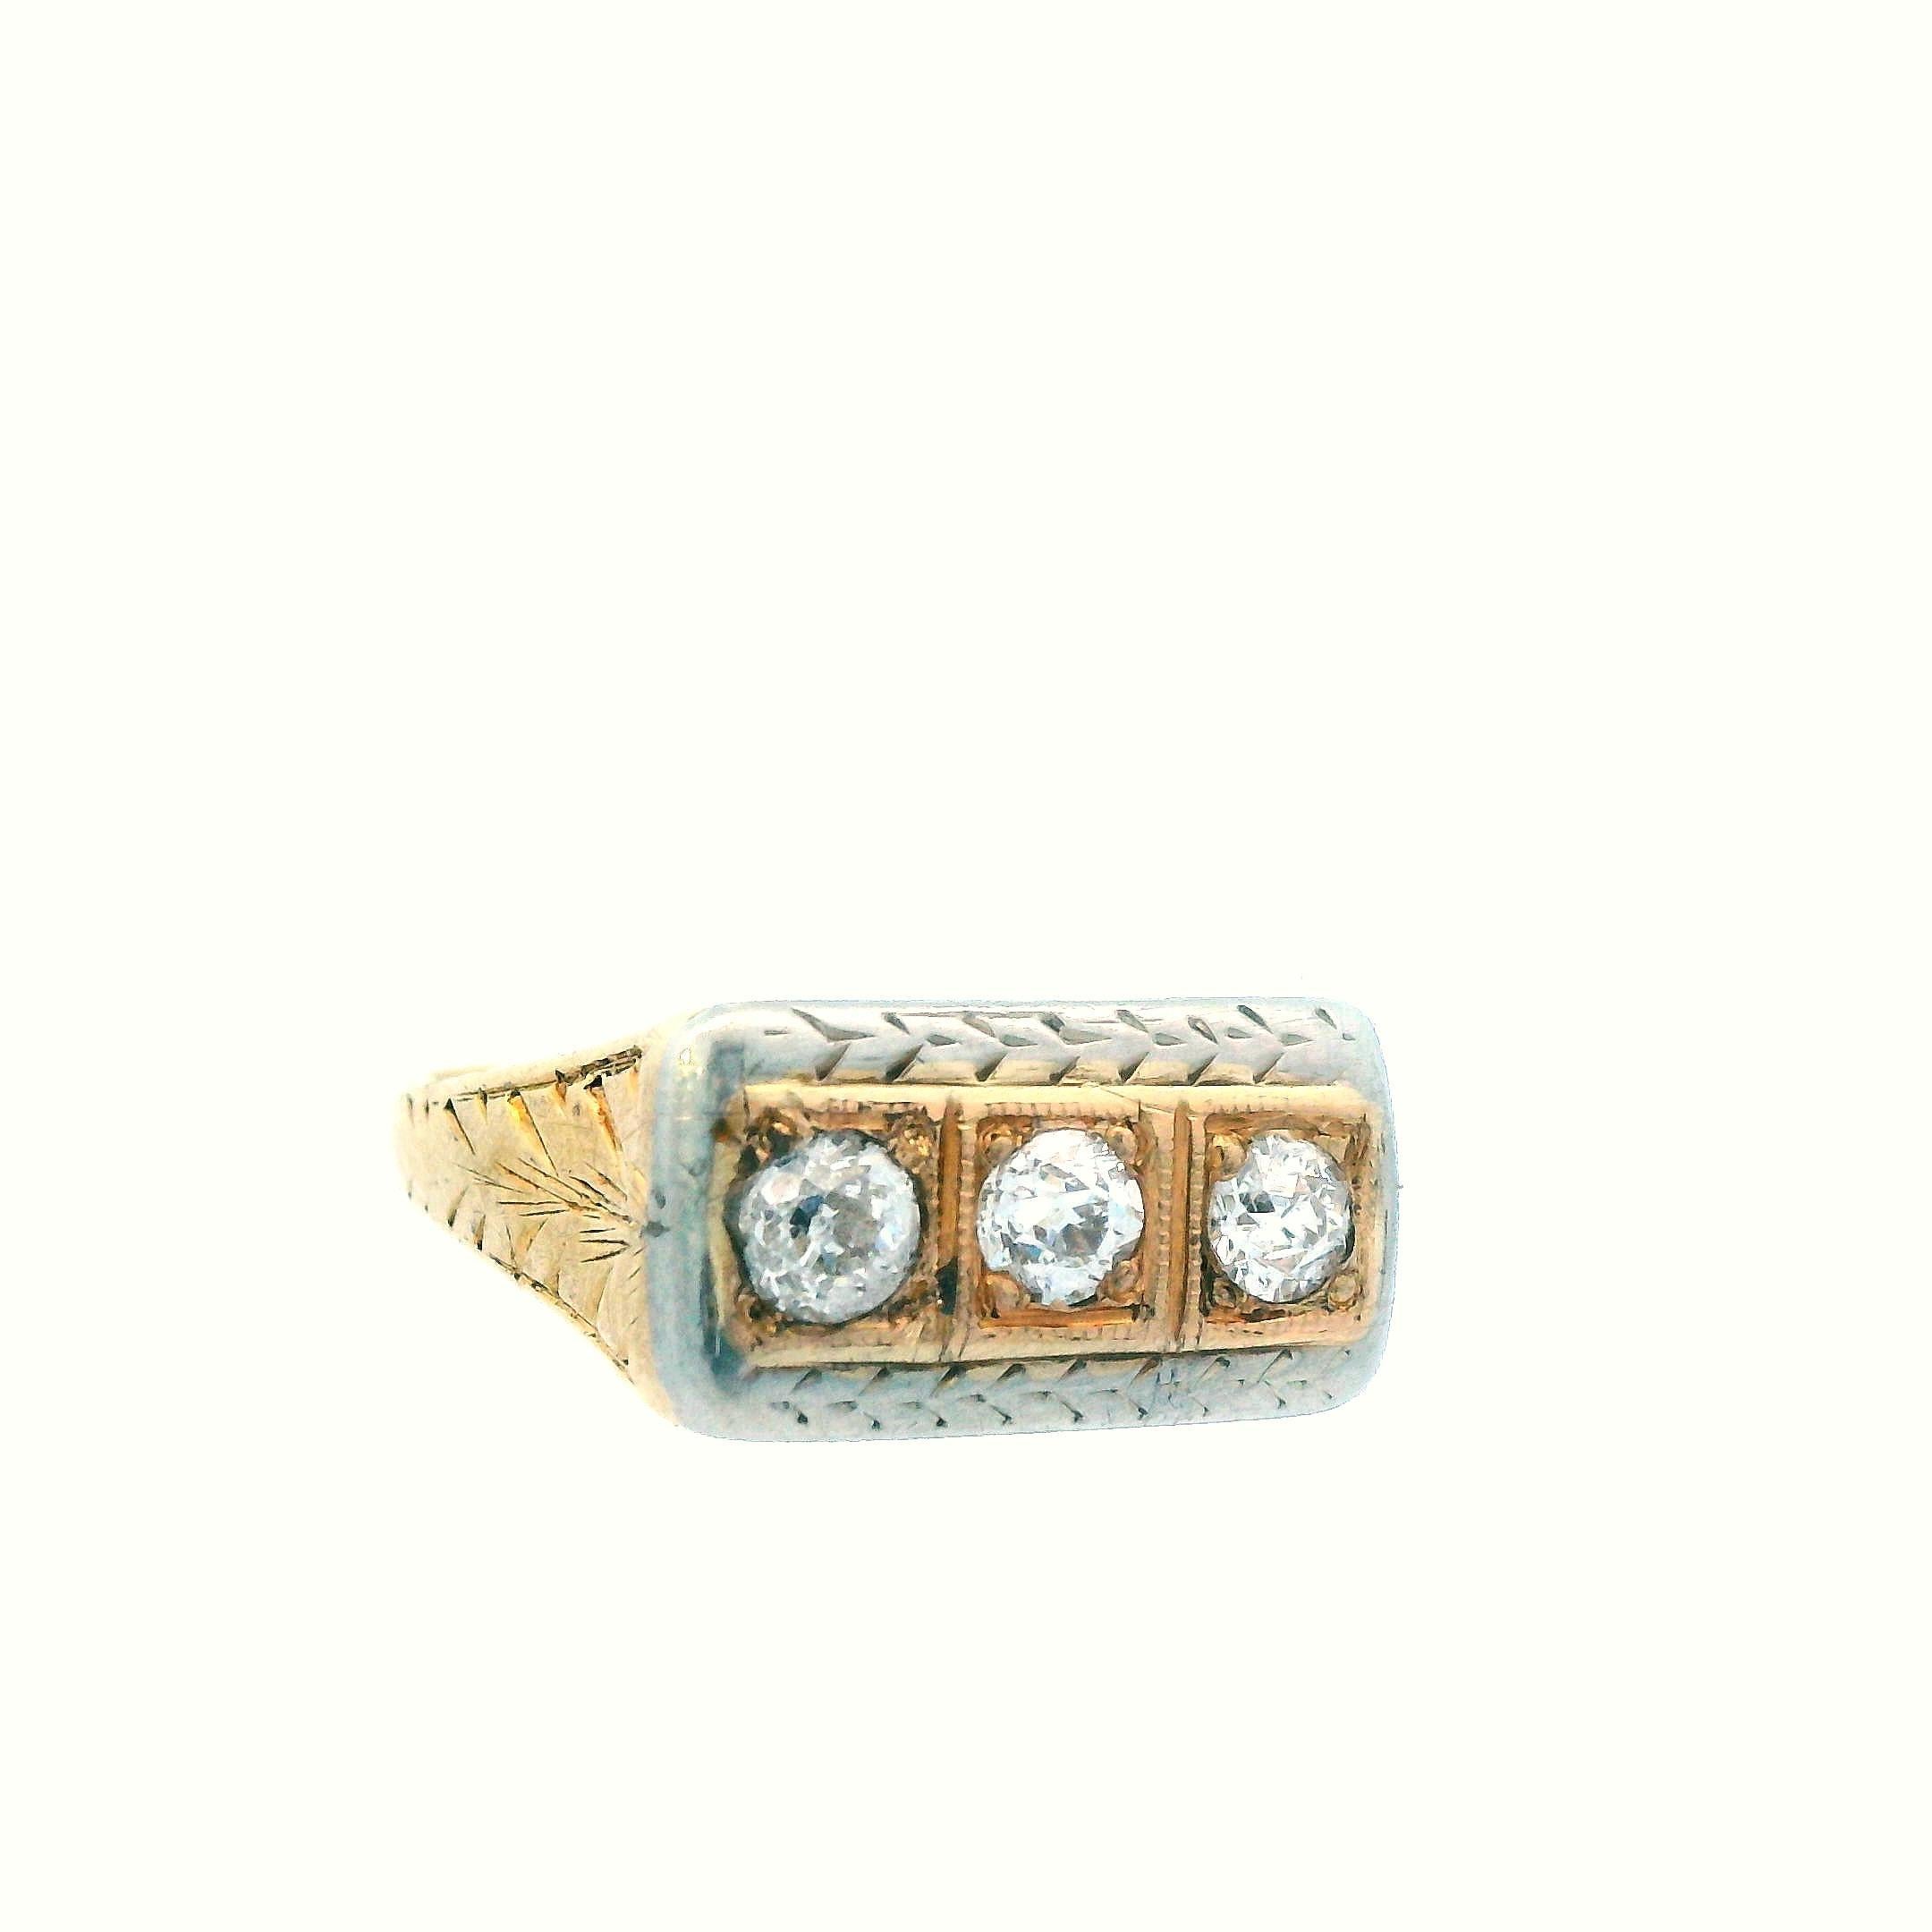 This beautiful ring from 1925 Art Deco is two tone, being made with both 14k yellow and 14k white gold, with 3 diamond stones. The ring is a size 4.5 but can be resized upon request. This is a perfect fashion ring as it contains both white and